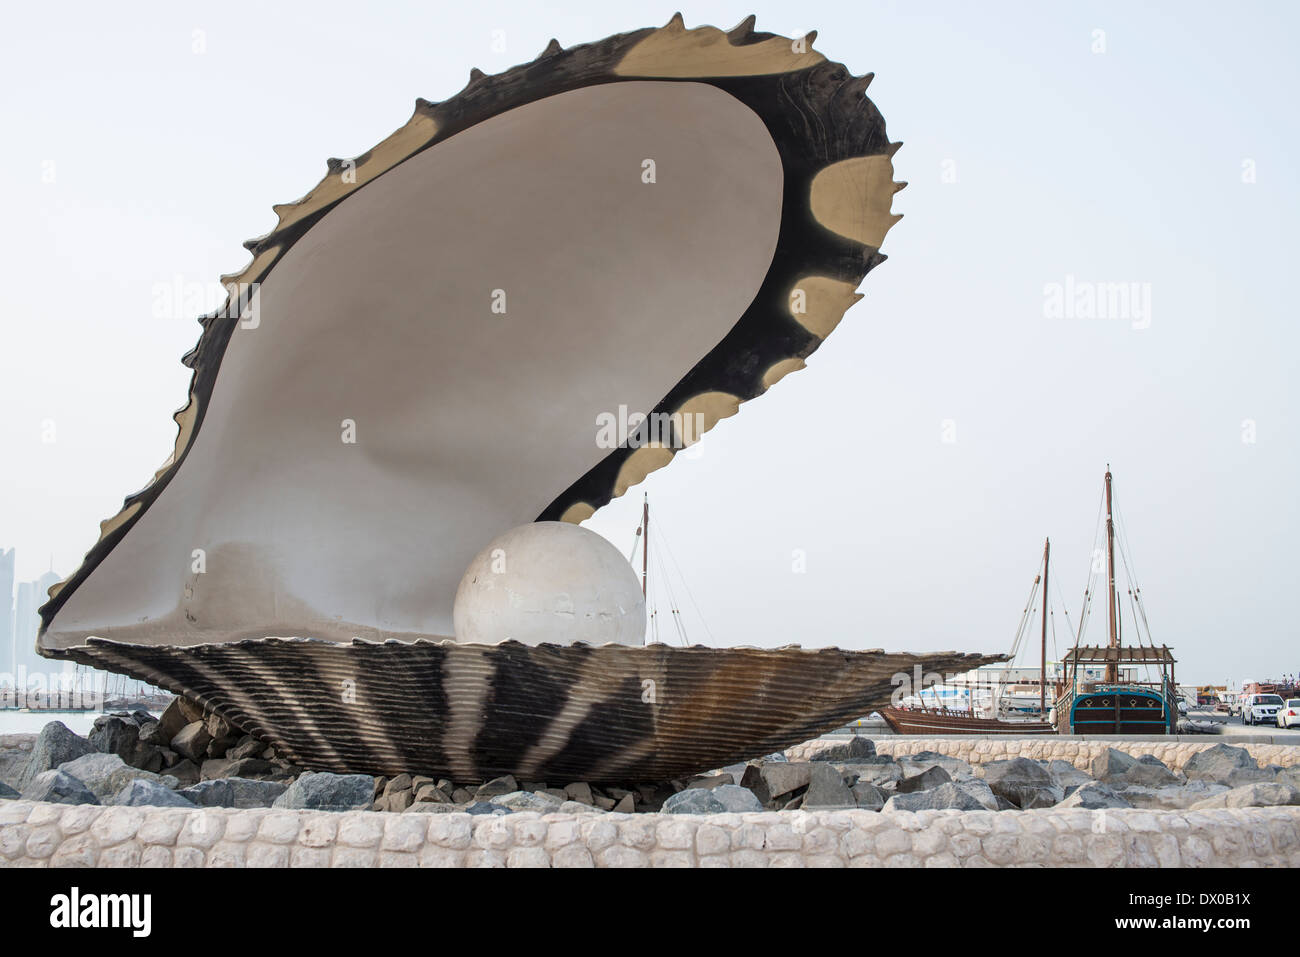 The big pearl and oyster, Doha Stock Photo